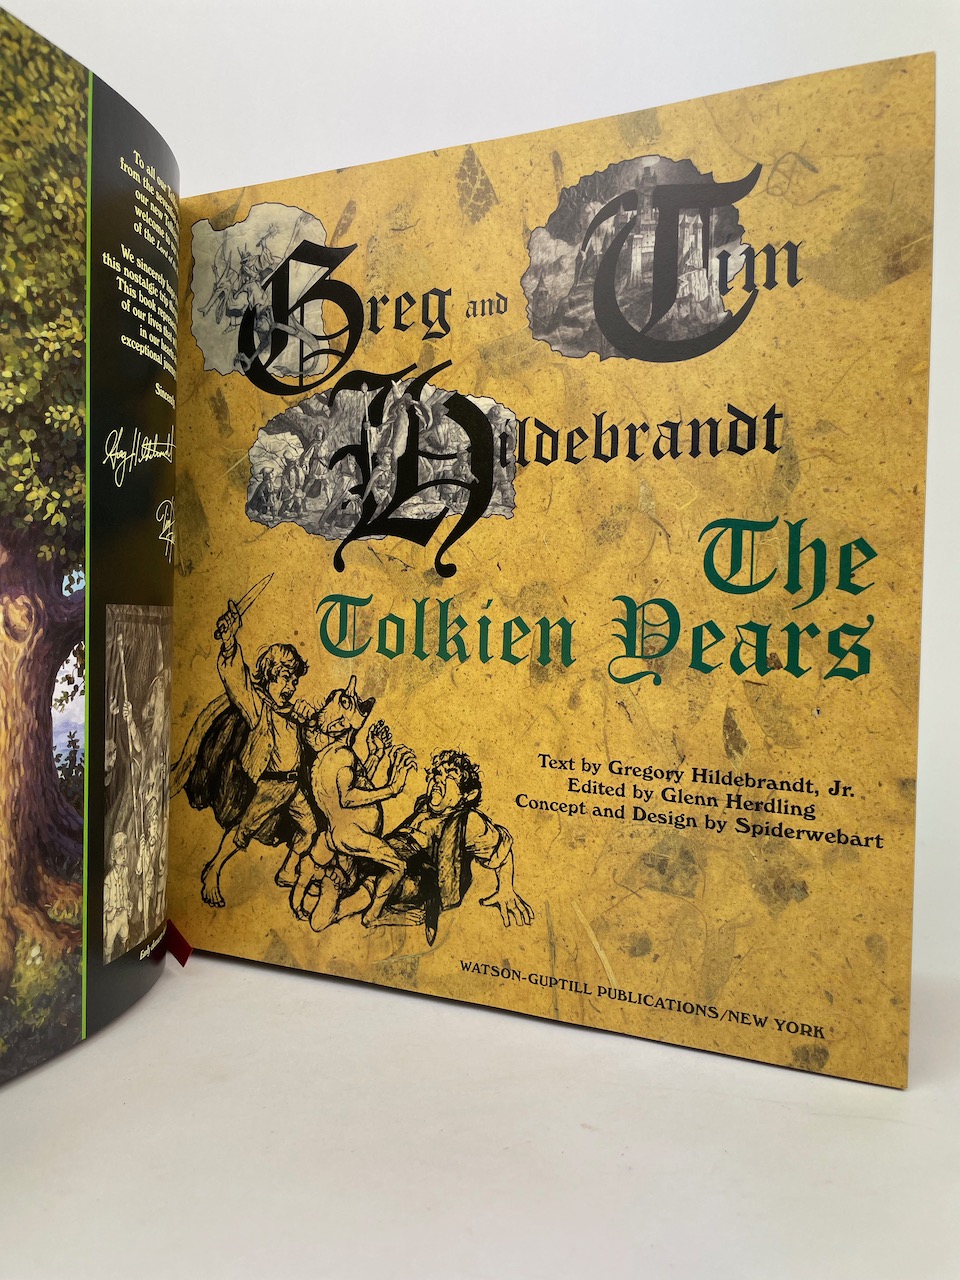 Greg and Tim Hildebrandt: The Tolkien Years Signed Limited Edition 6